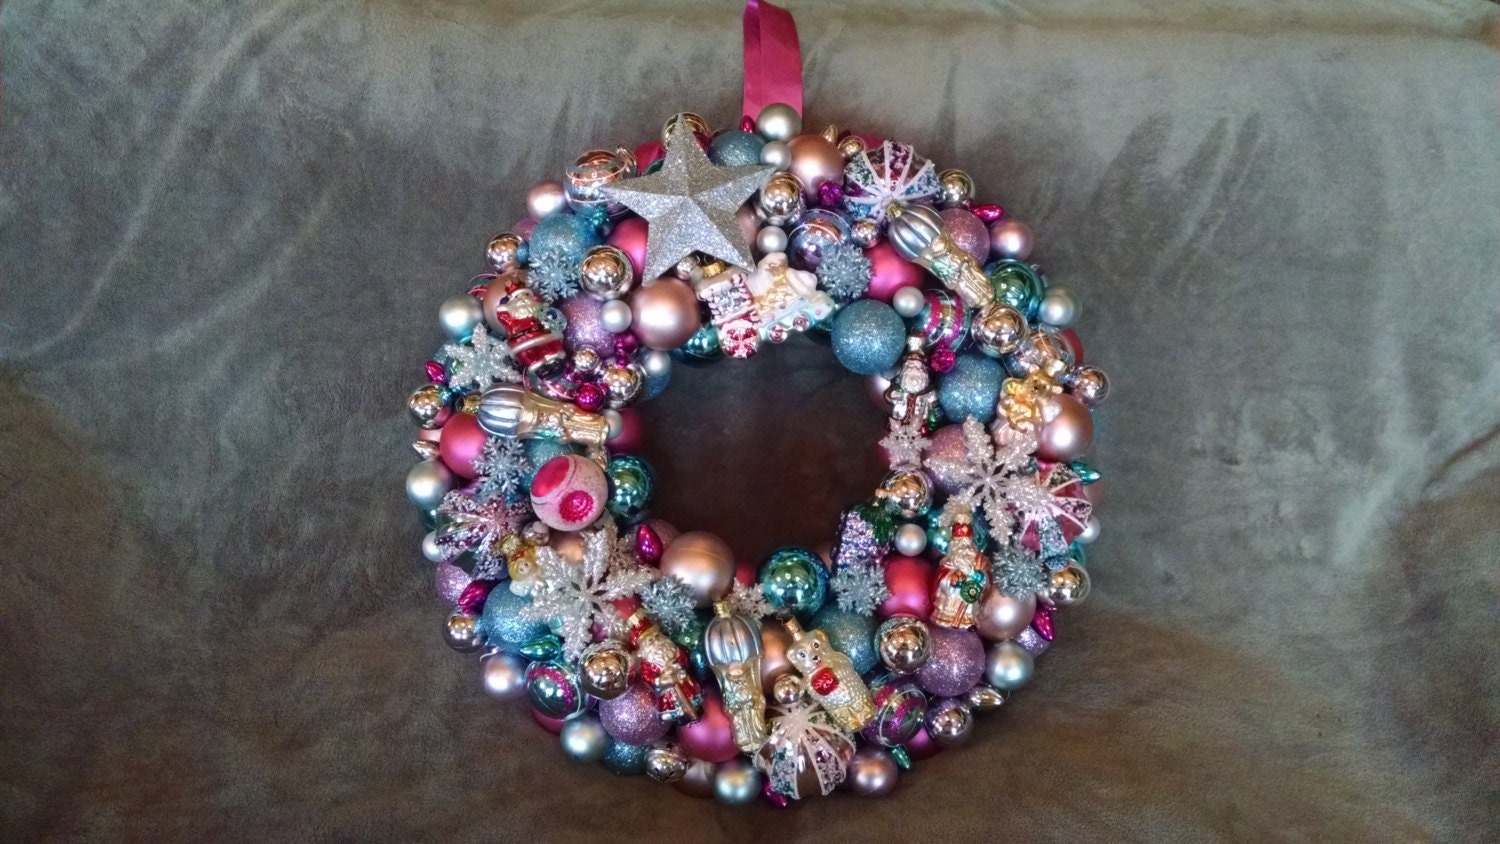 25% OFF SALE ***Pastel Christmas Ornament Wreath - Aqua, Pink and Silver Holiday Wreath